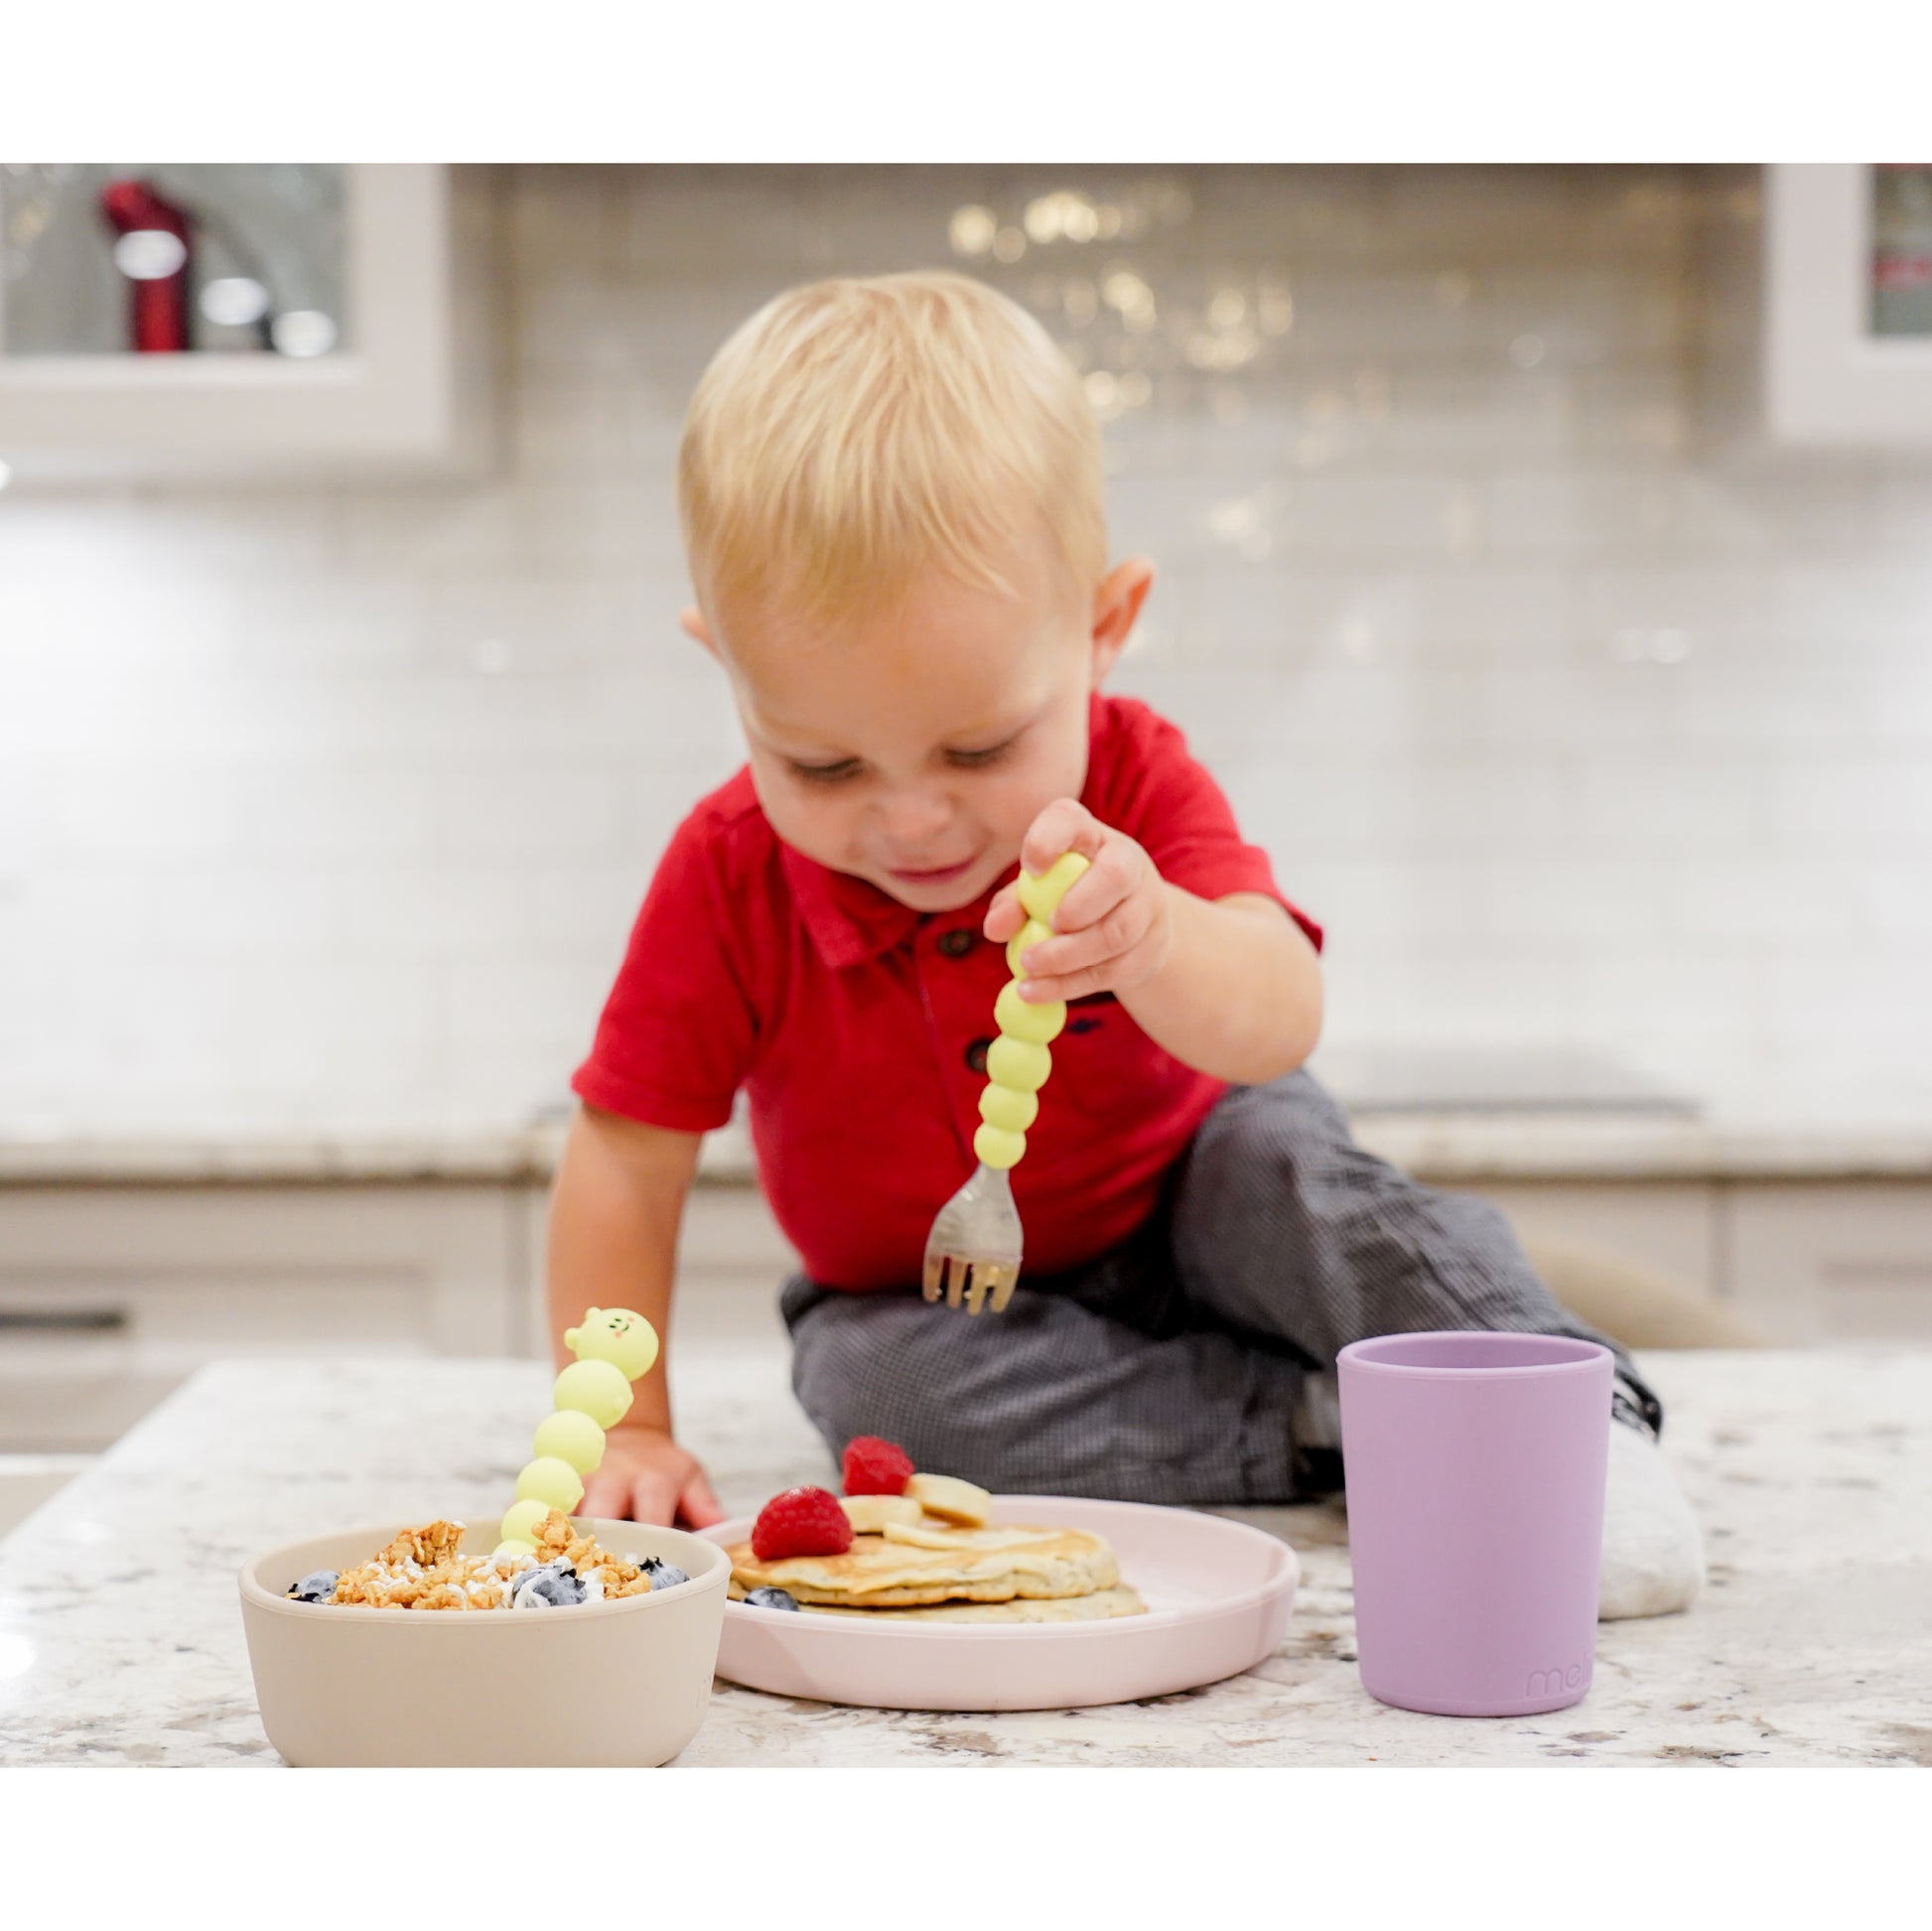 Melii 3-Piece Silicone Meal Set - Colorful, Durable, and Safe Dinnerware for Babies, Toddlers, and Kids - BPA-Free, Microwave Safe, Easy-Clean Dish Set